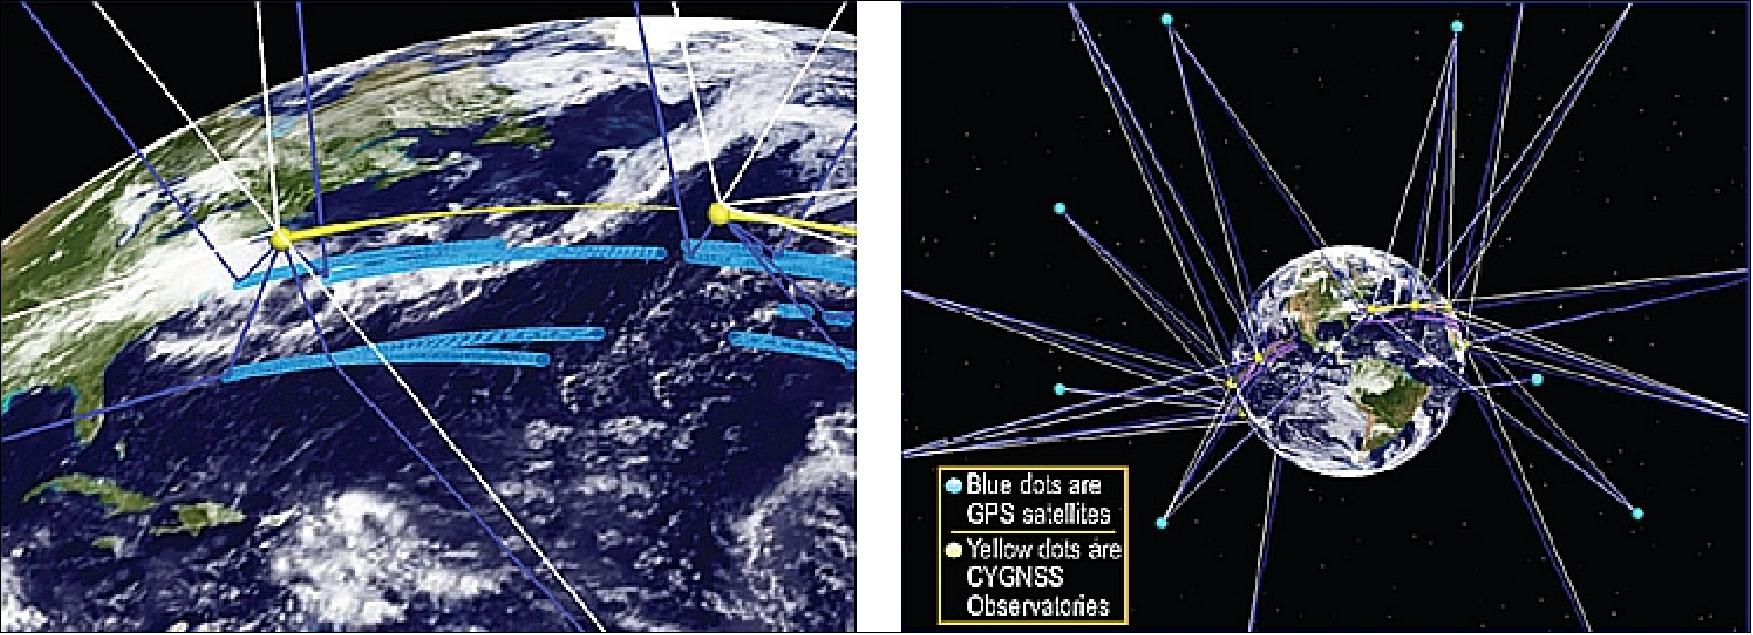 Figure 46: The CYGNSS Constellation (left); the CYGNSS observatories are shown as yellow spheres. The white lines represent direct GPS signals and the blue ocean surface scattered signals. The lighter blue circles on the Earth surface represent individual samples of the Delay Doppler Map. -At right, the full constellation of GPS transmitters and CYGNSS receivers in the bistatic radar constellation are shown (image credit: CYGNSS project, Ref. 4)